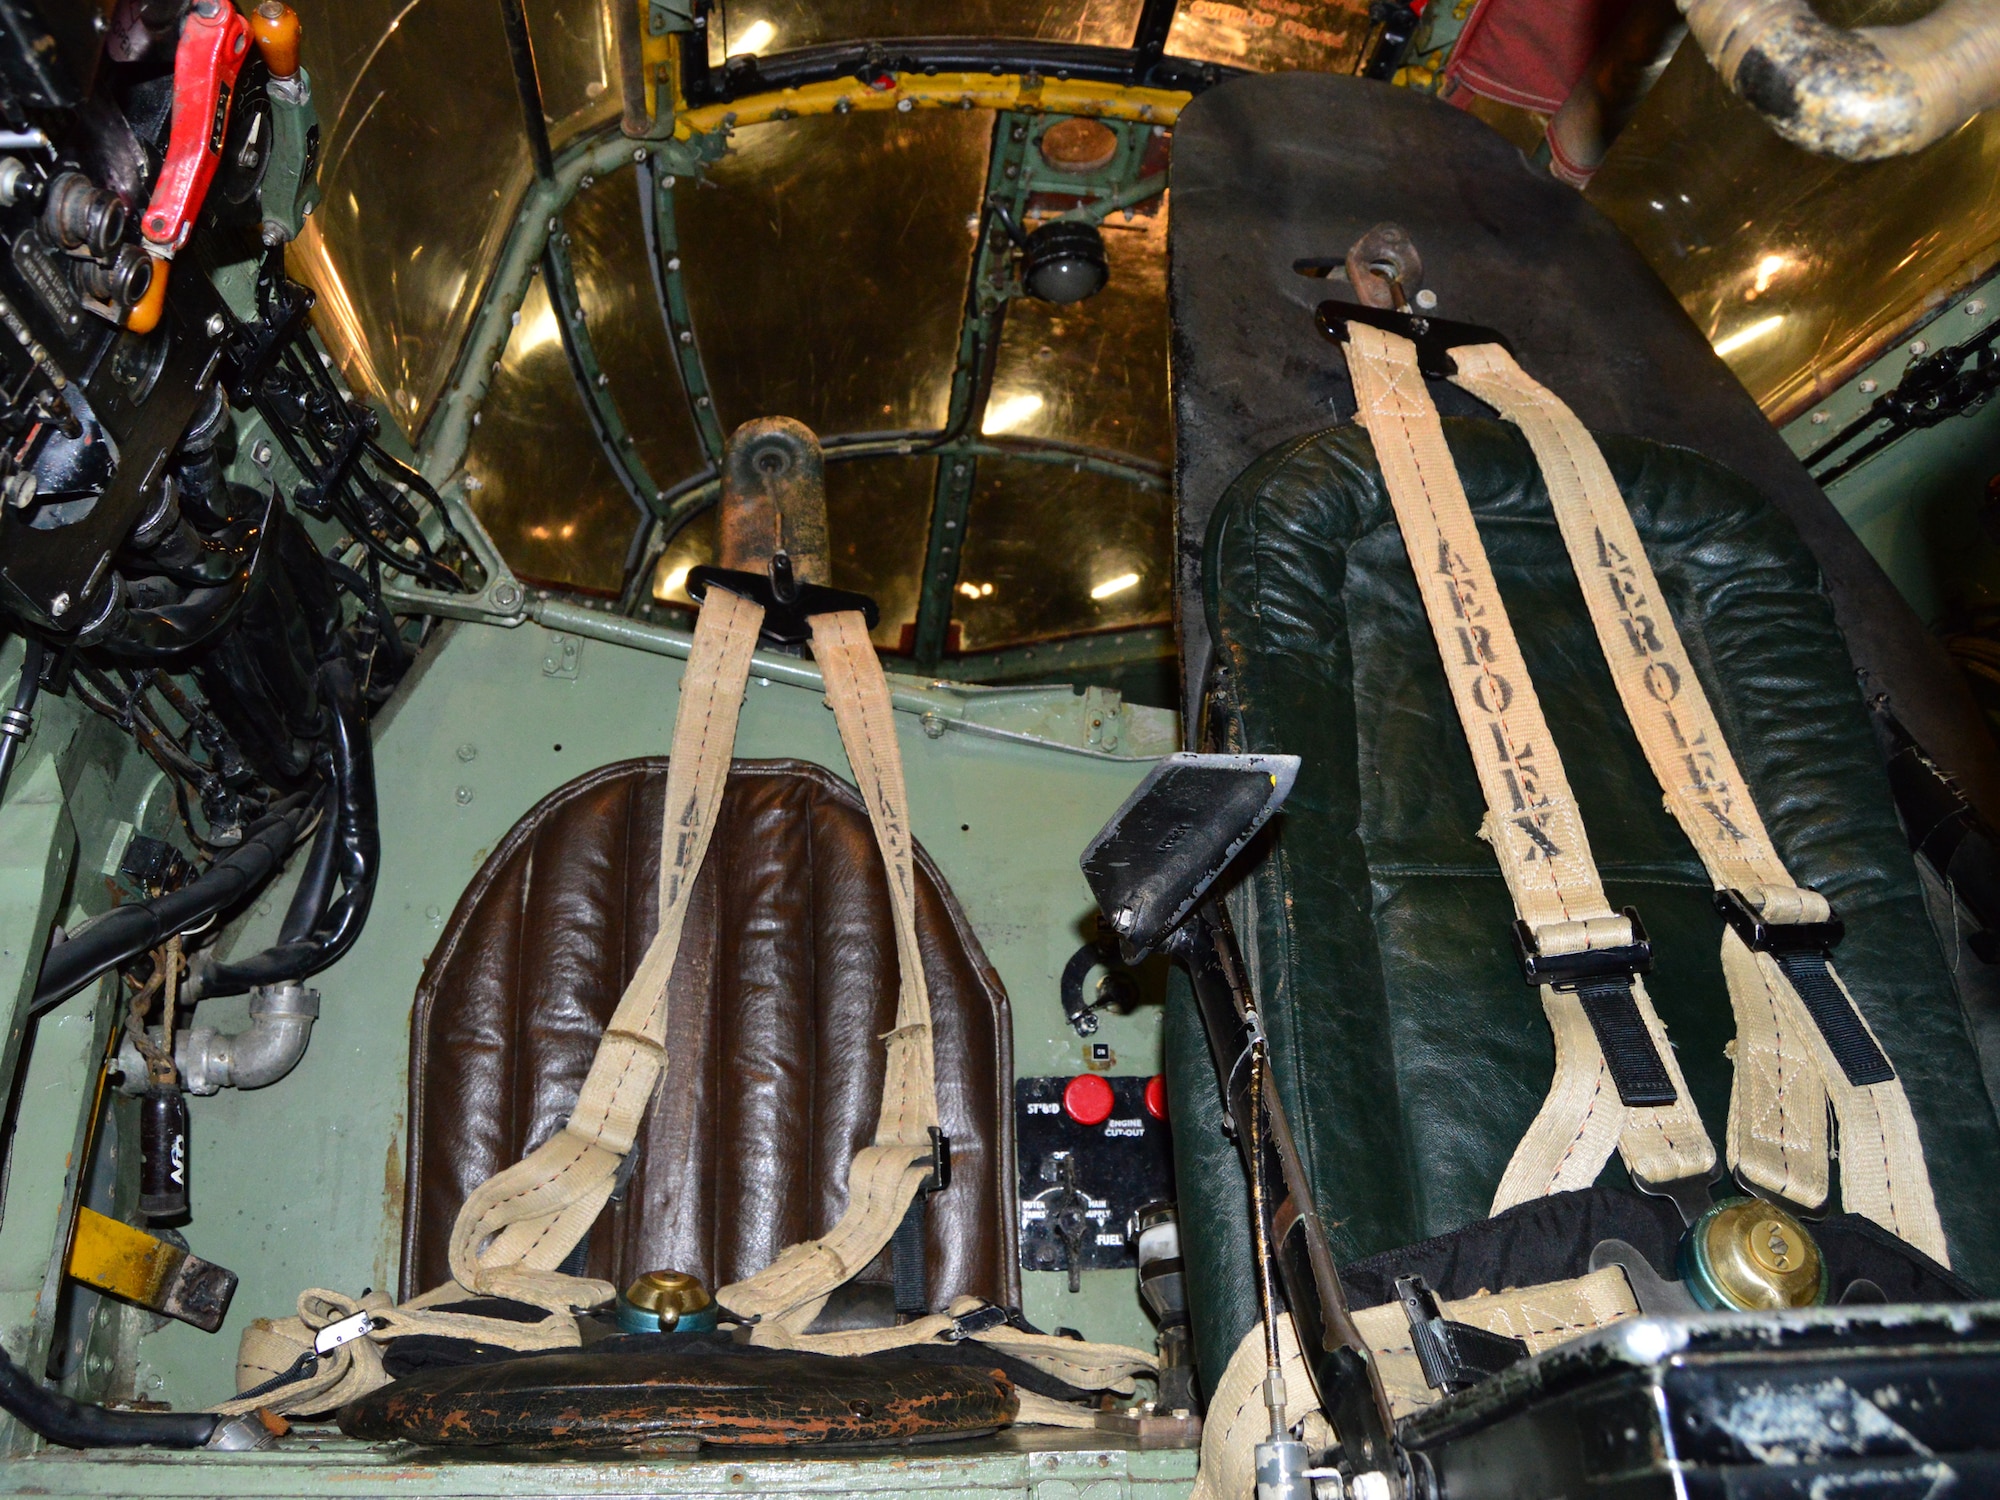 DAYTON, Ohio - De Havilland DH 98 cockpit in the WWII Gallery at the National Museum of the U.S. Air Force. (U.S. Air Force photo by Ken LaRock)